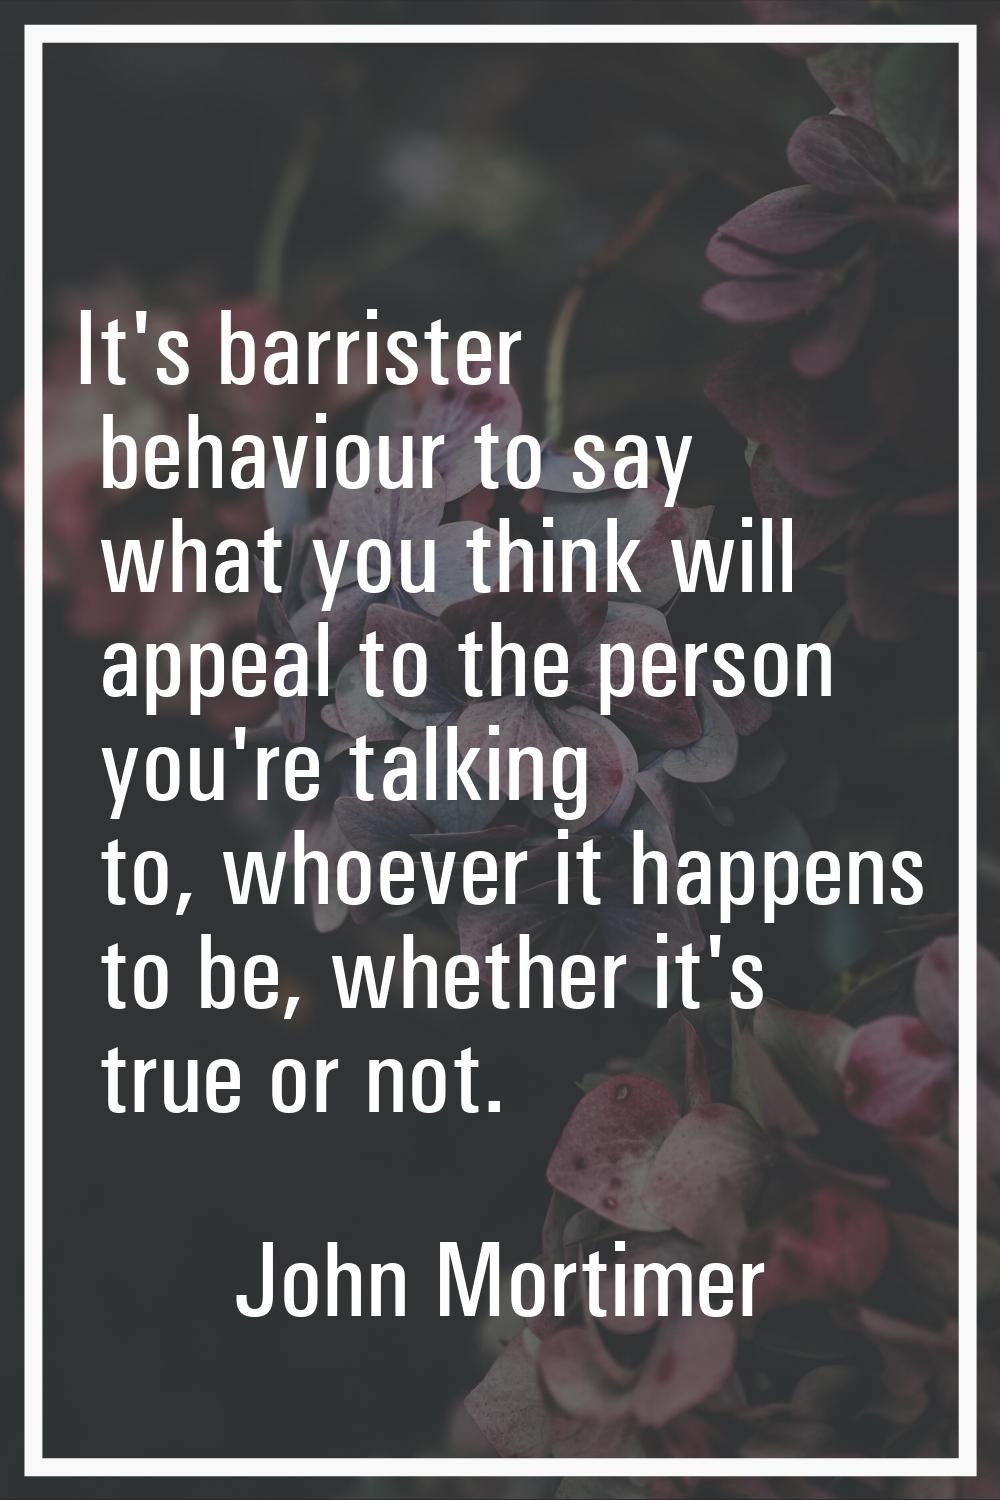 It's barrister behaviour to say what you think will appeal to the person you're talking to, whoever